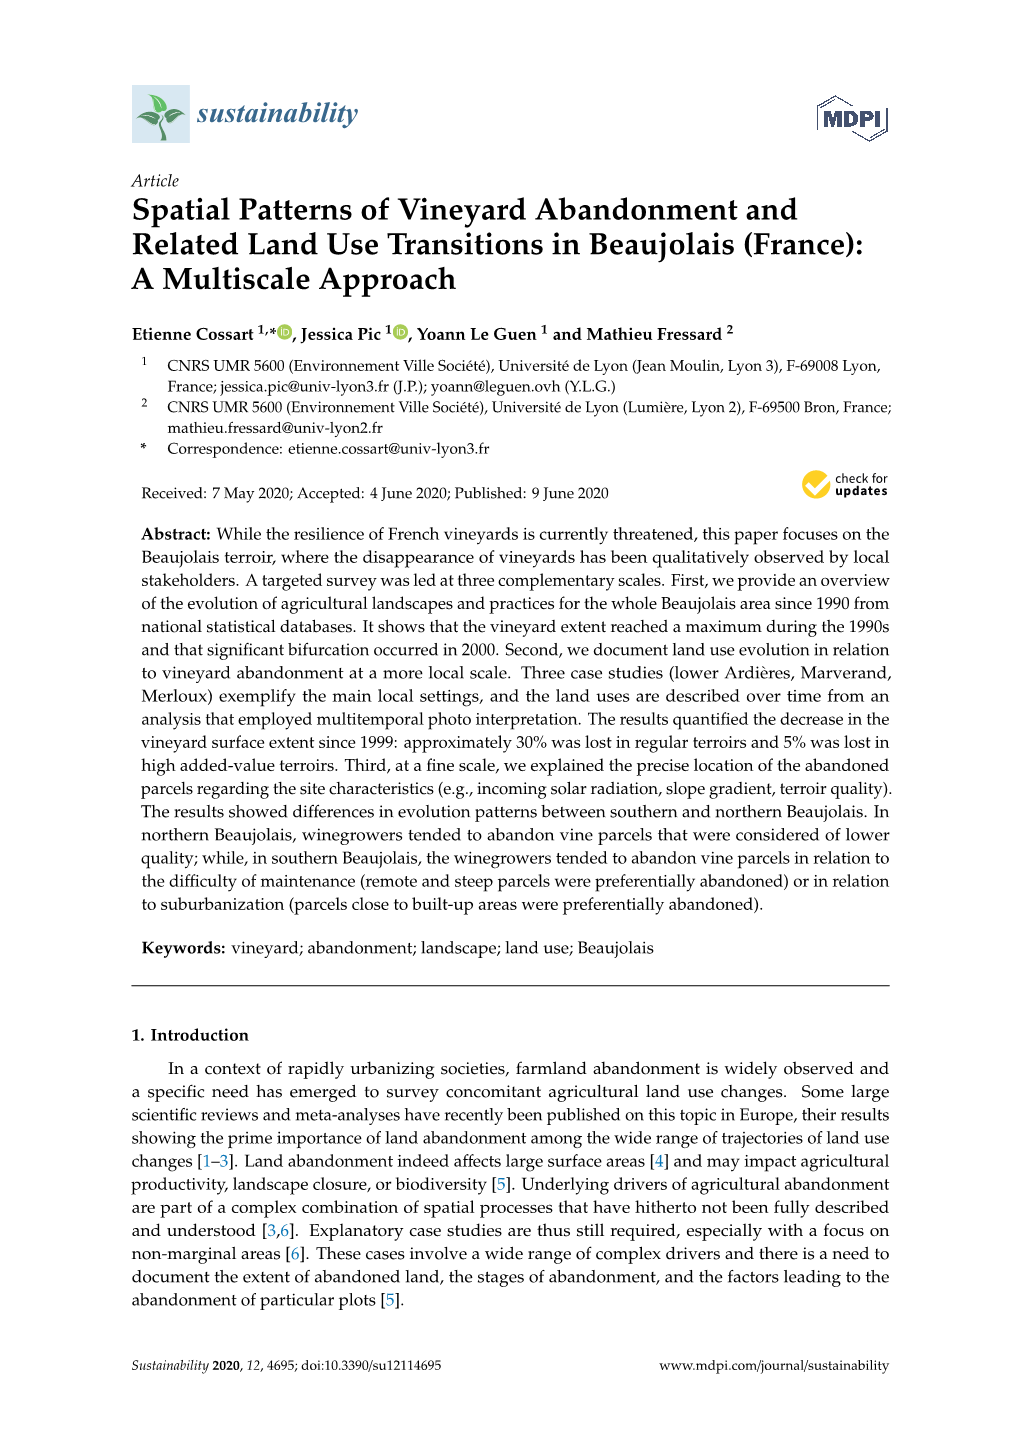 Spatial Patterns of Vineyard Abandonment and Related Land Use Transitions in Beaujolais (France): a Multiscale Approach